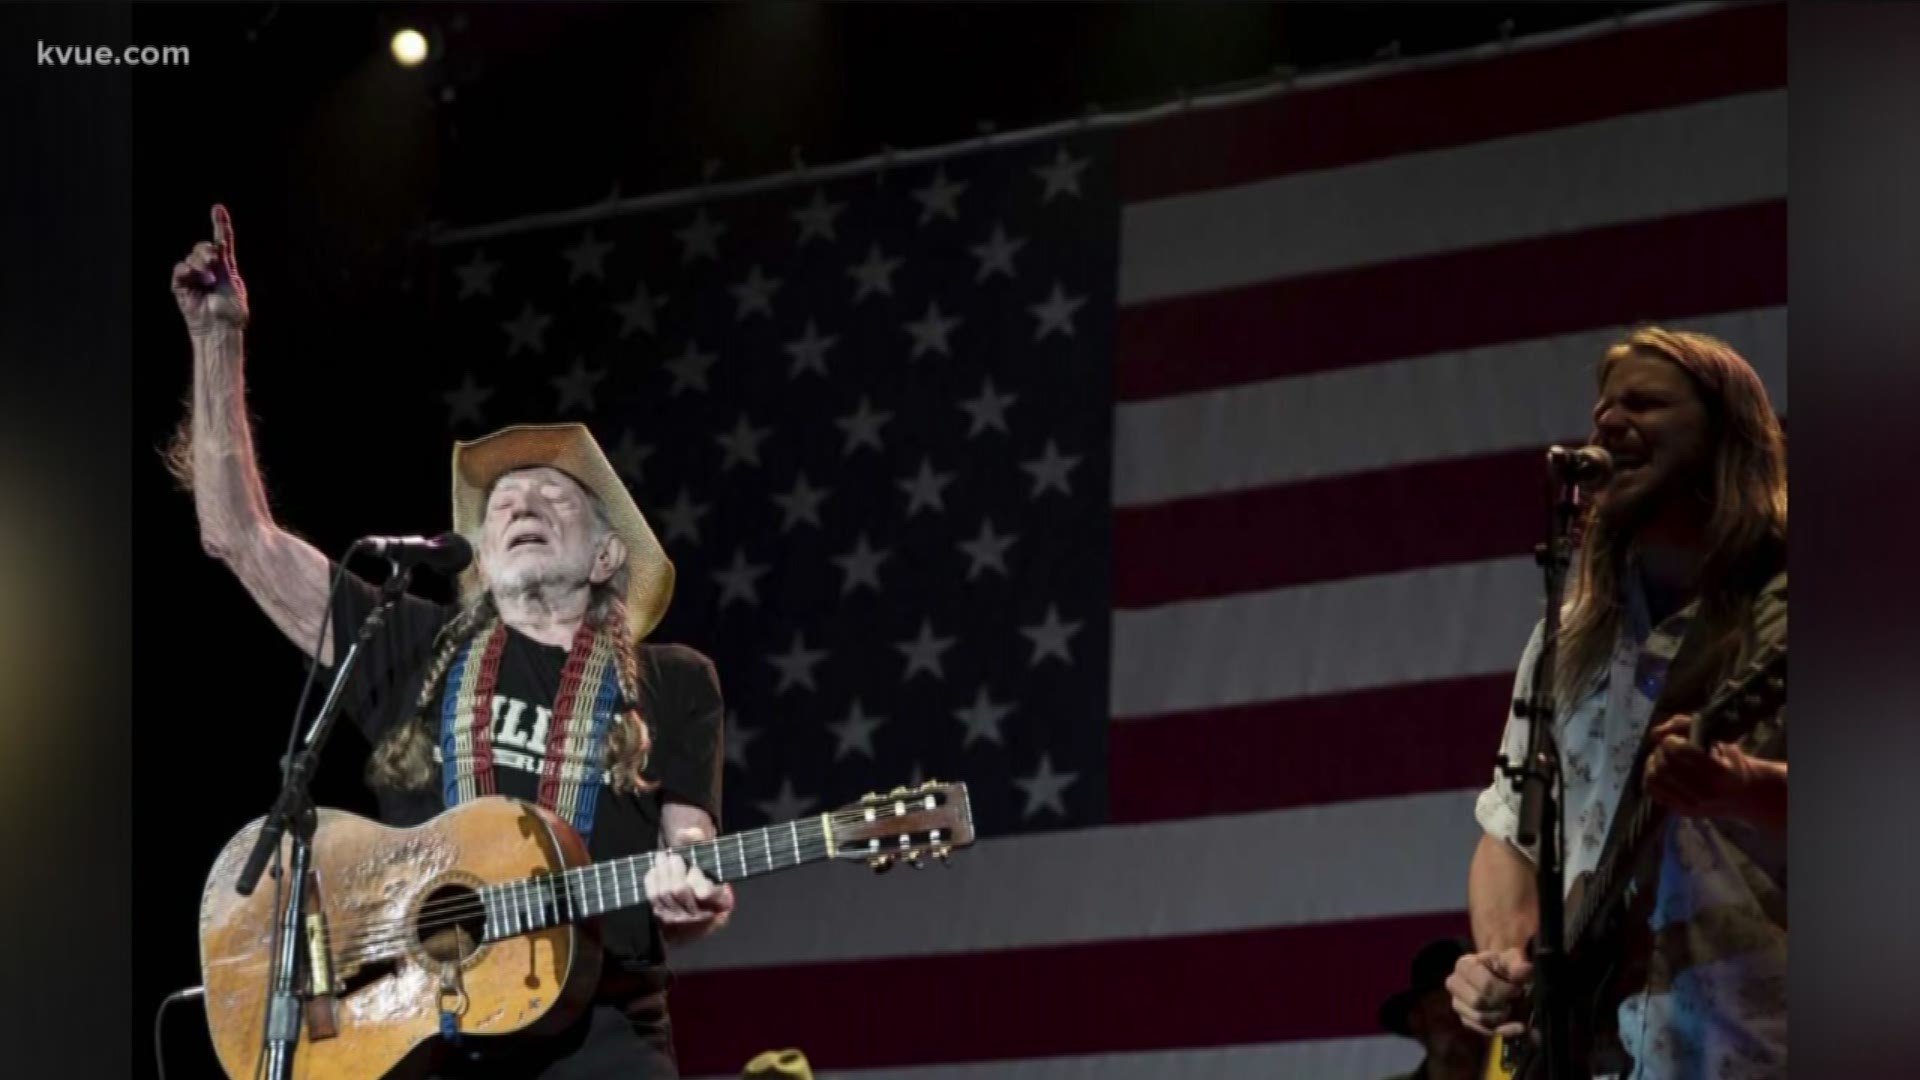 Give it up for Willie! You can catch the iconic performer at Willie Nelson’s Fourth of July Picnic at the Circuit of Americas Thursday. Here to talk about the event and ticket information is Brent Fabschutz, music and entertainment manager at COTA.